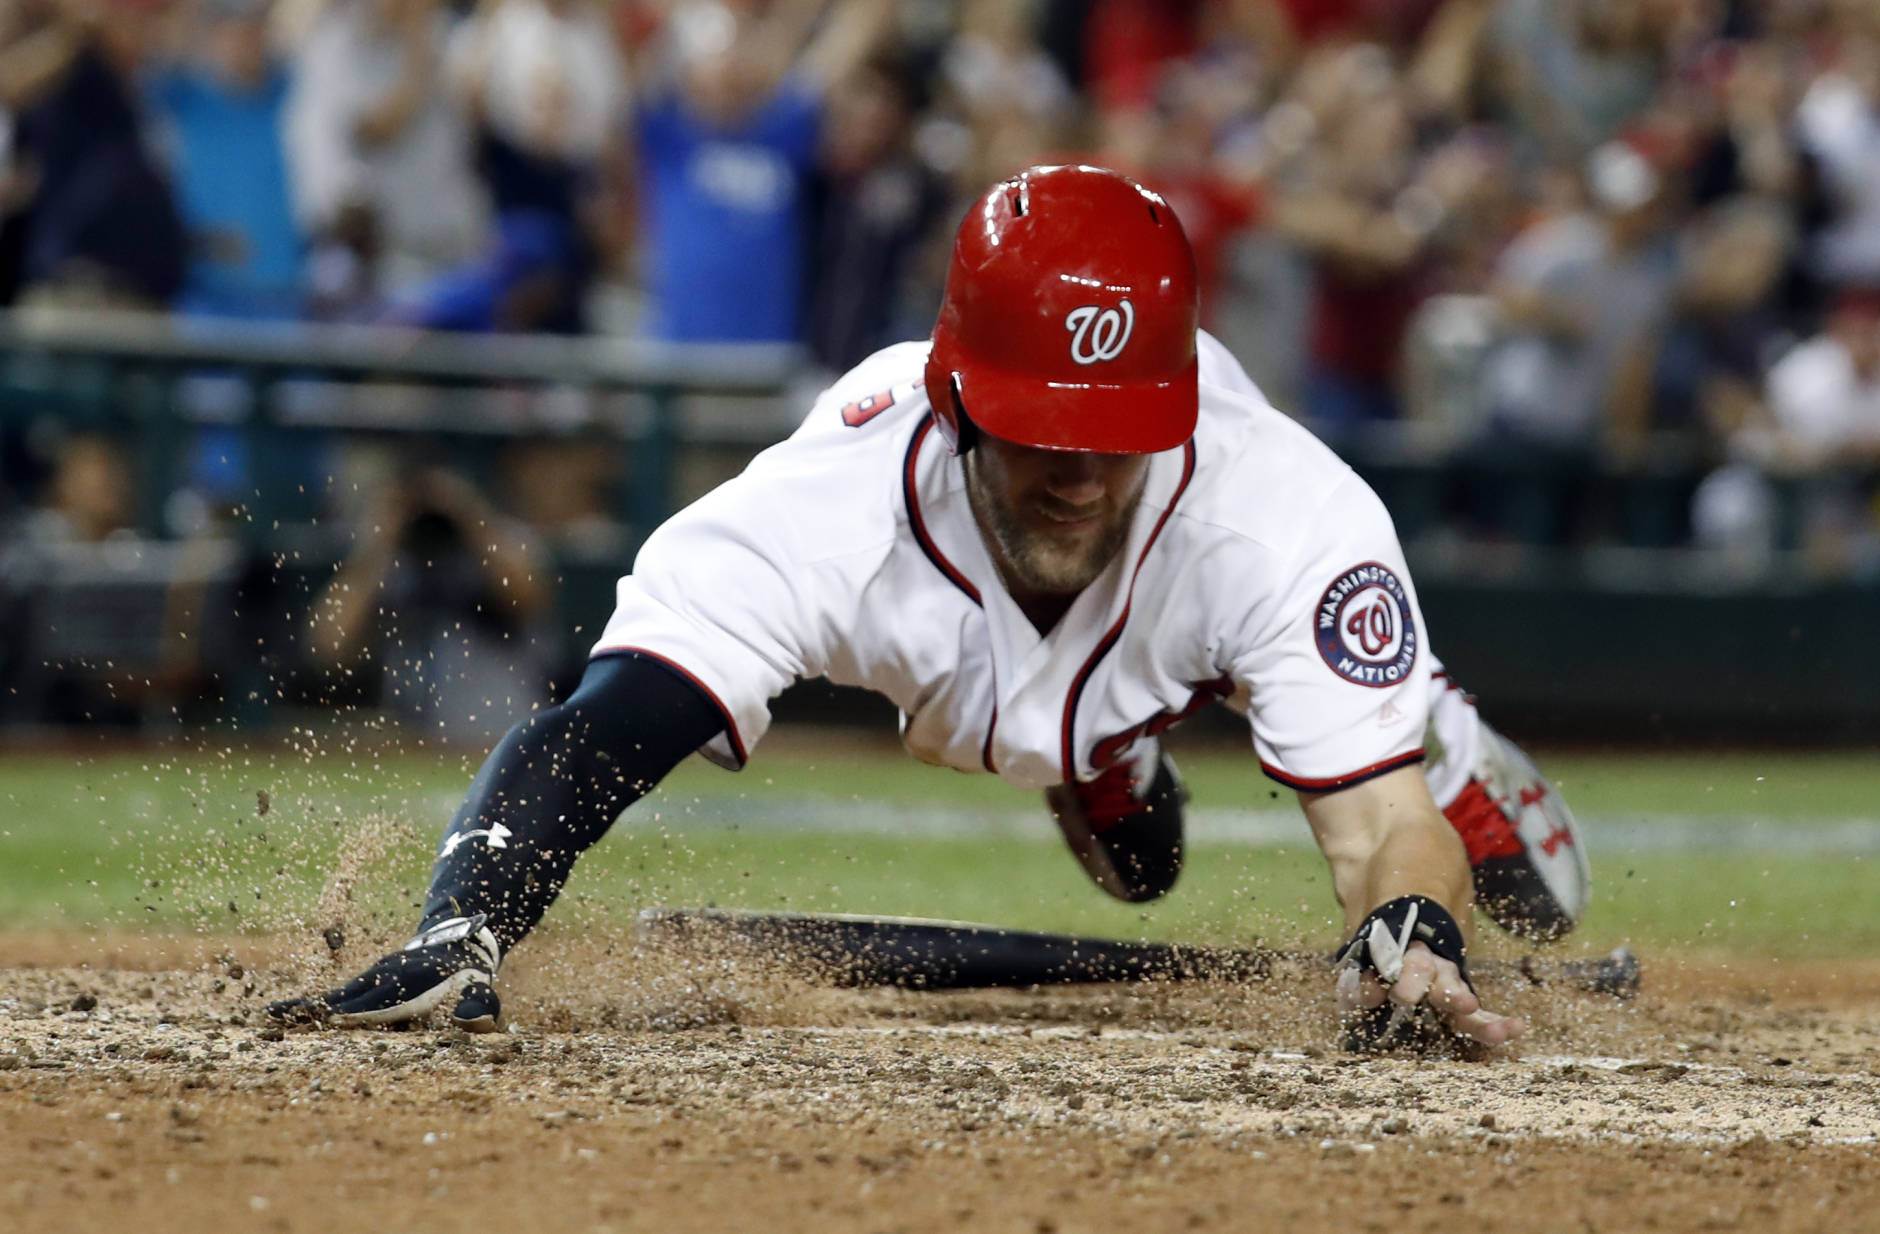 Washington Nationals' Bryce Harper dives for home scoring a run during the ninth inning of a baseball game against the New York Mets at Nationals Park, Tuesday, Sept. 13, 2016, in Washington. Mets won 4-3 in 10 innings. (AP Photo/Alex Brandon)